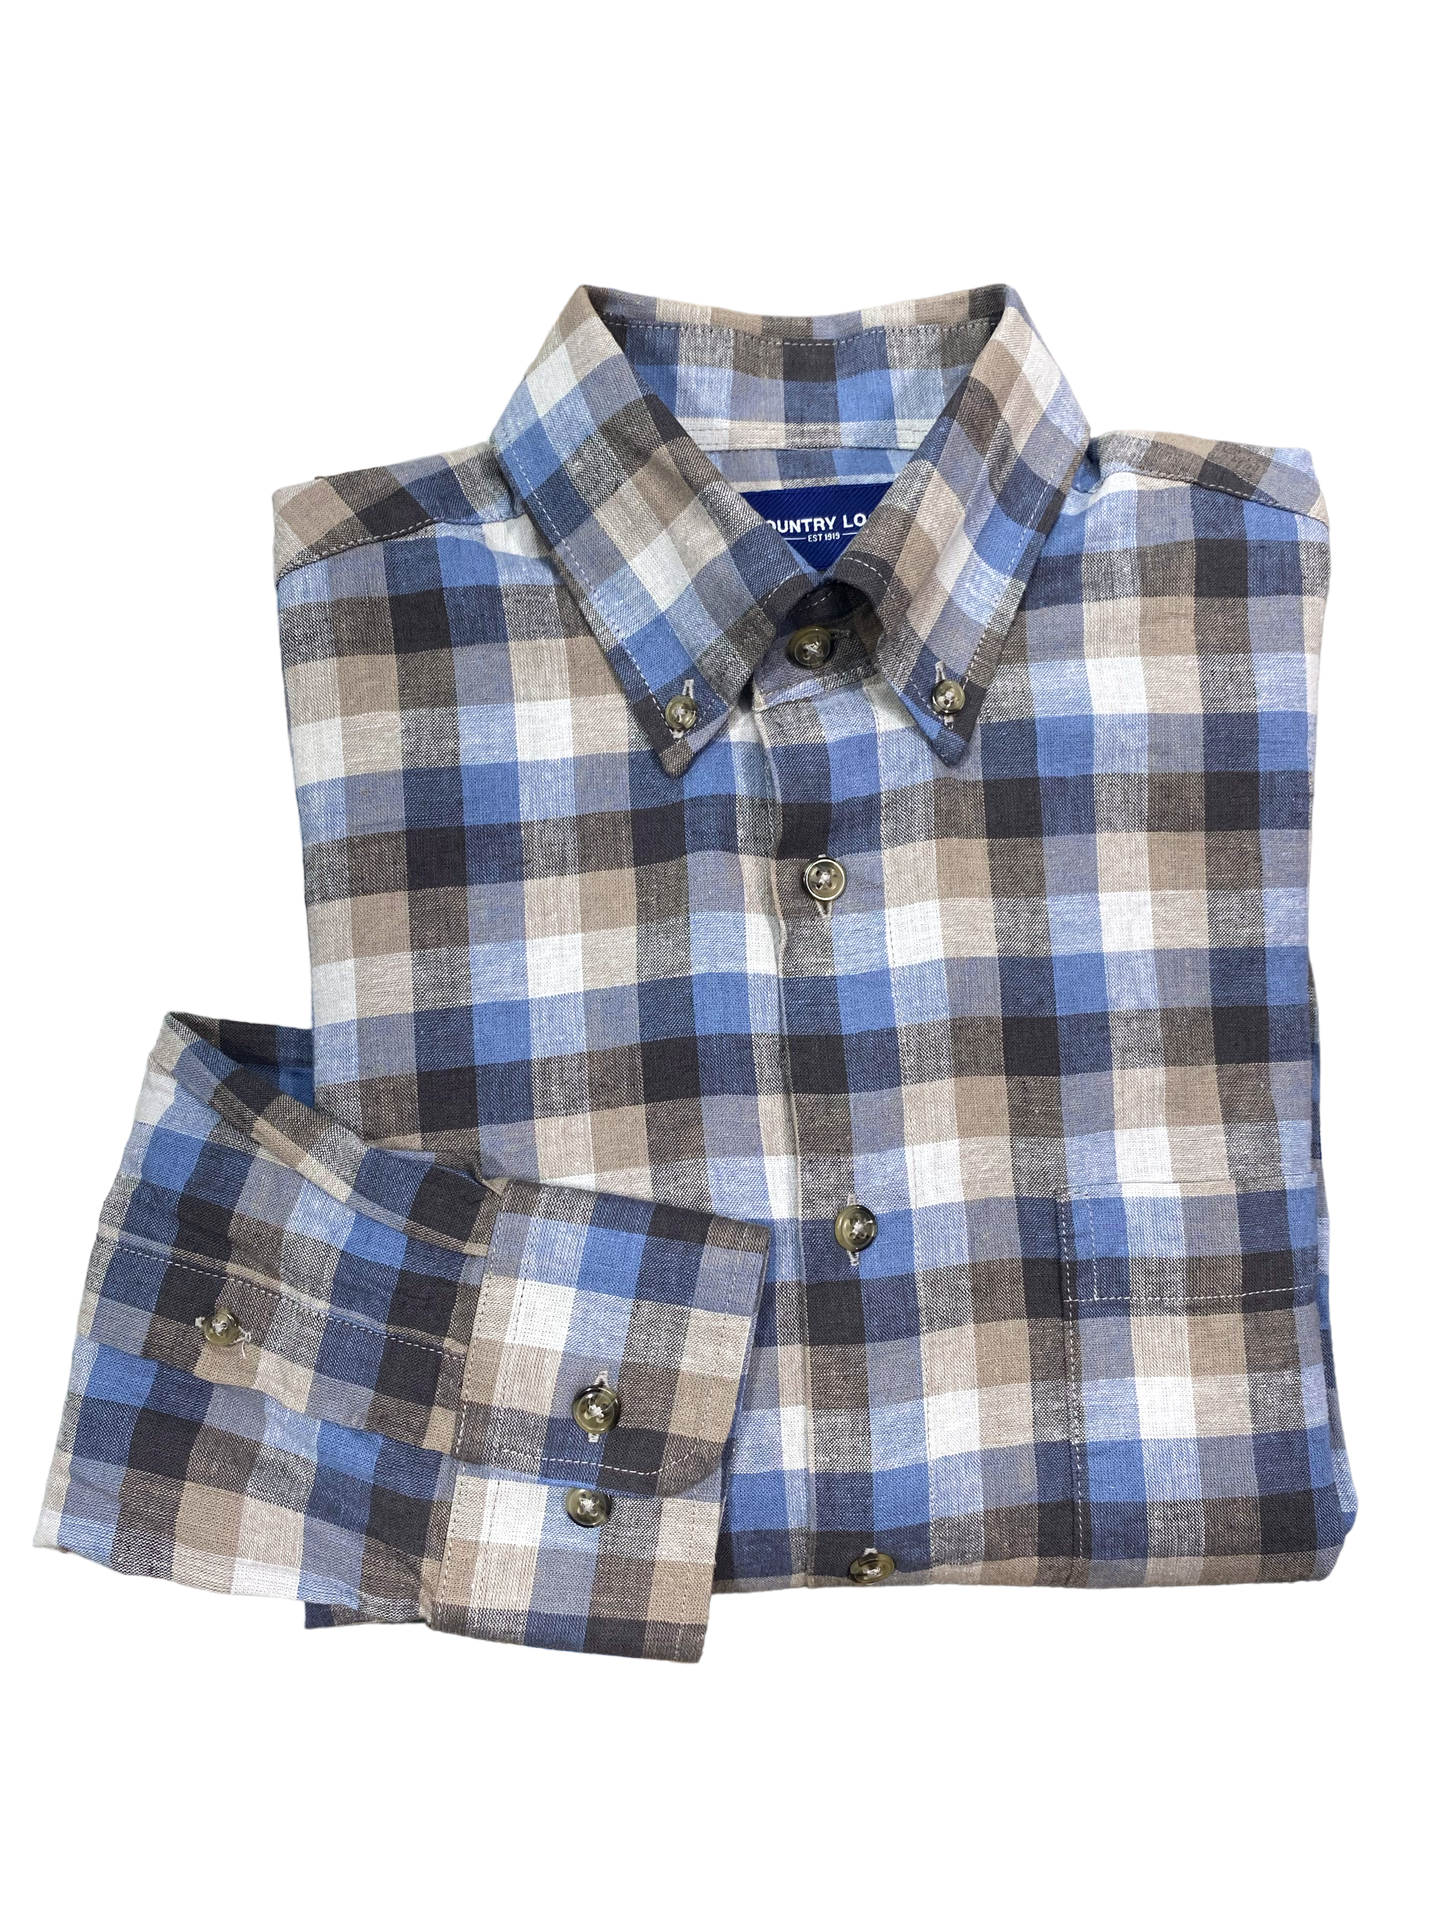 Country Look - Galway Linen Blend Shirt - Coffee/Blue Check